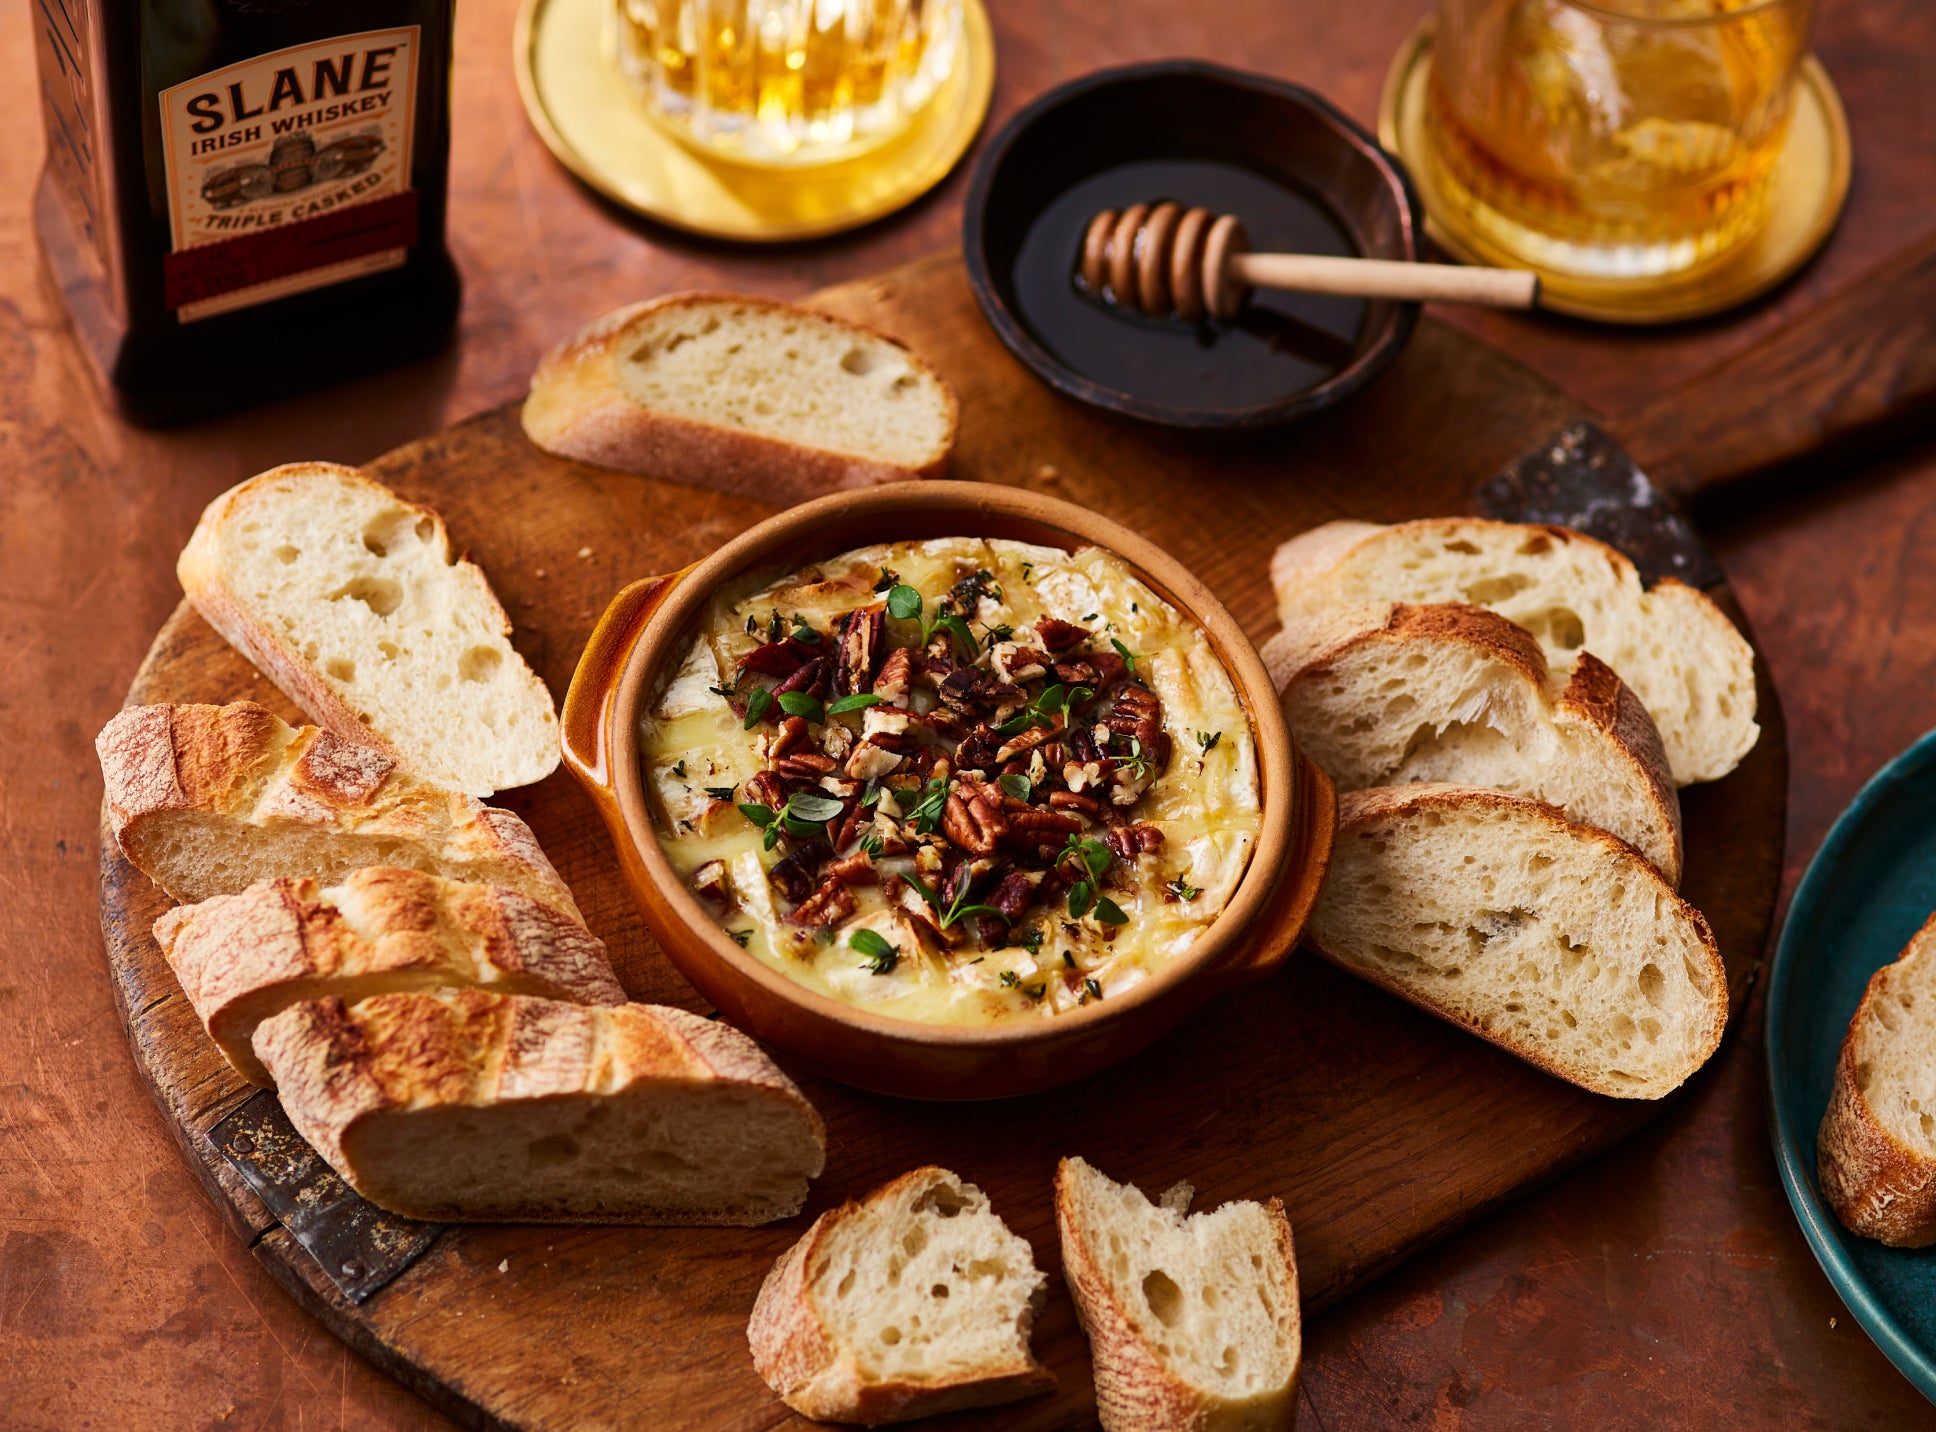 Flavoursome and sophisticated, this Whiskey Baked Camembert will wow your guests